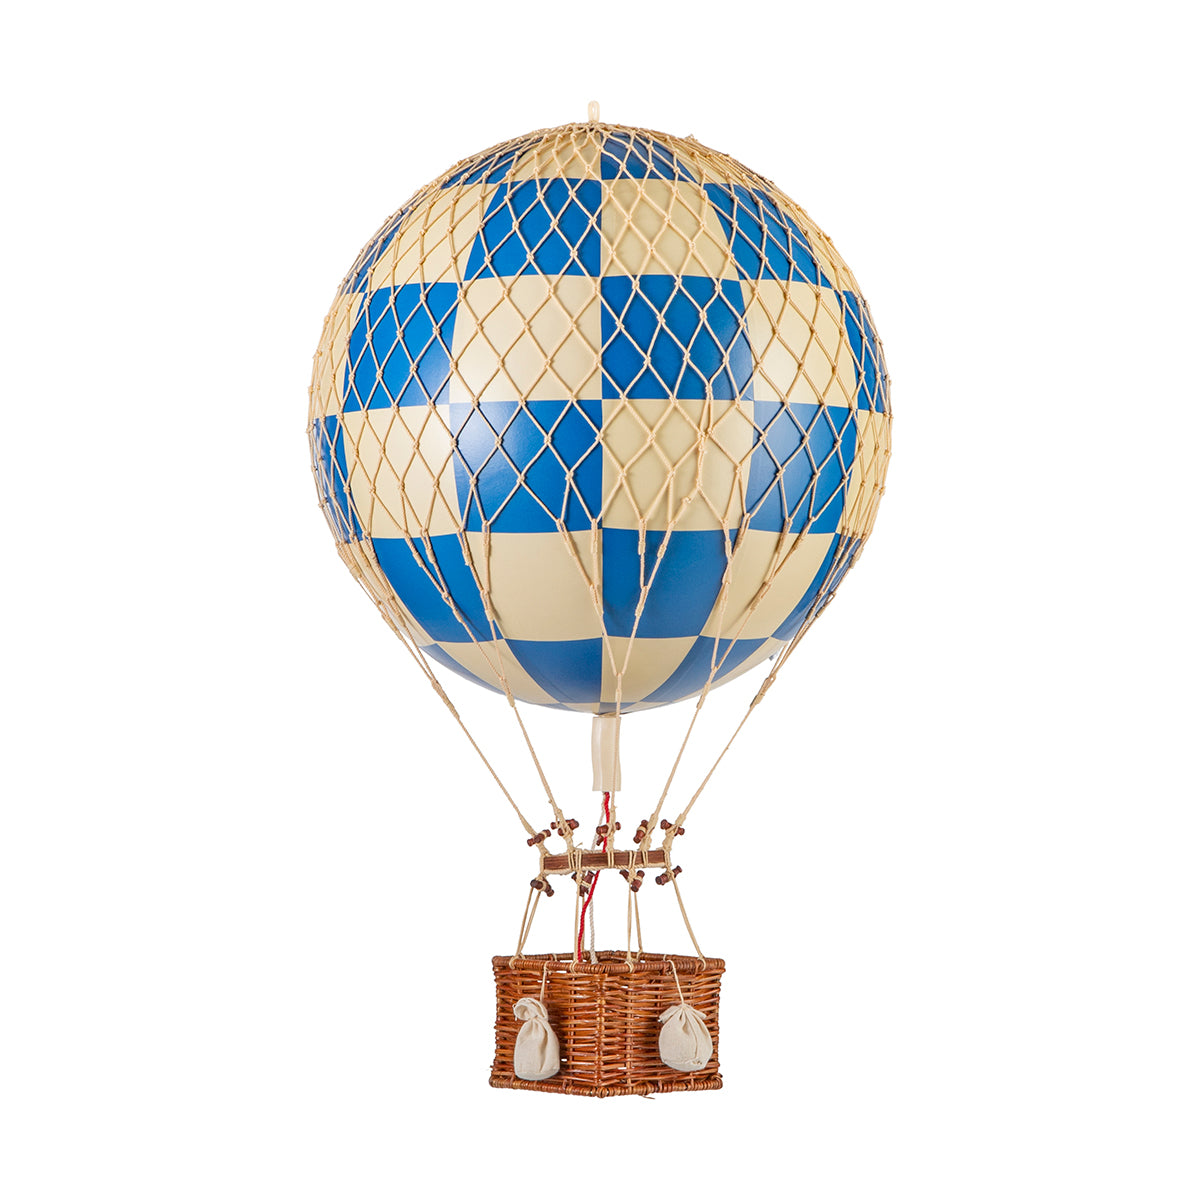 Embark on a breathtaking journey in the Wonderen Medium Hot Air Balloon - Royal Aero, ascending to new heights for a unique perspective. The mesmerizing blue and white balloon from Wonderen Stroopwafels comes with a charming basket for an unforgettable experience.